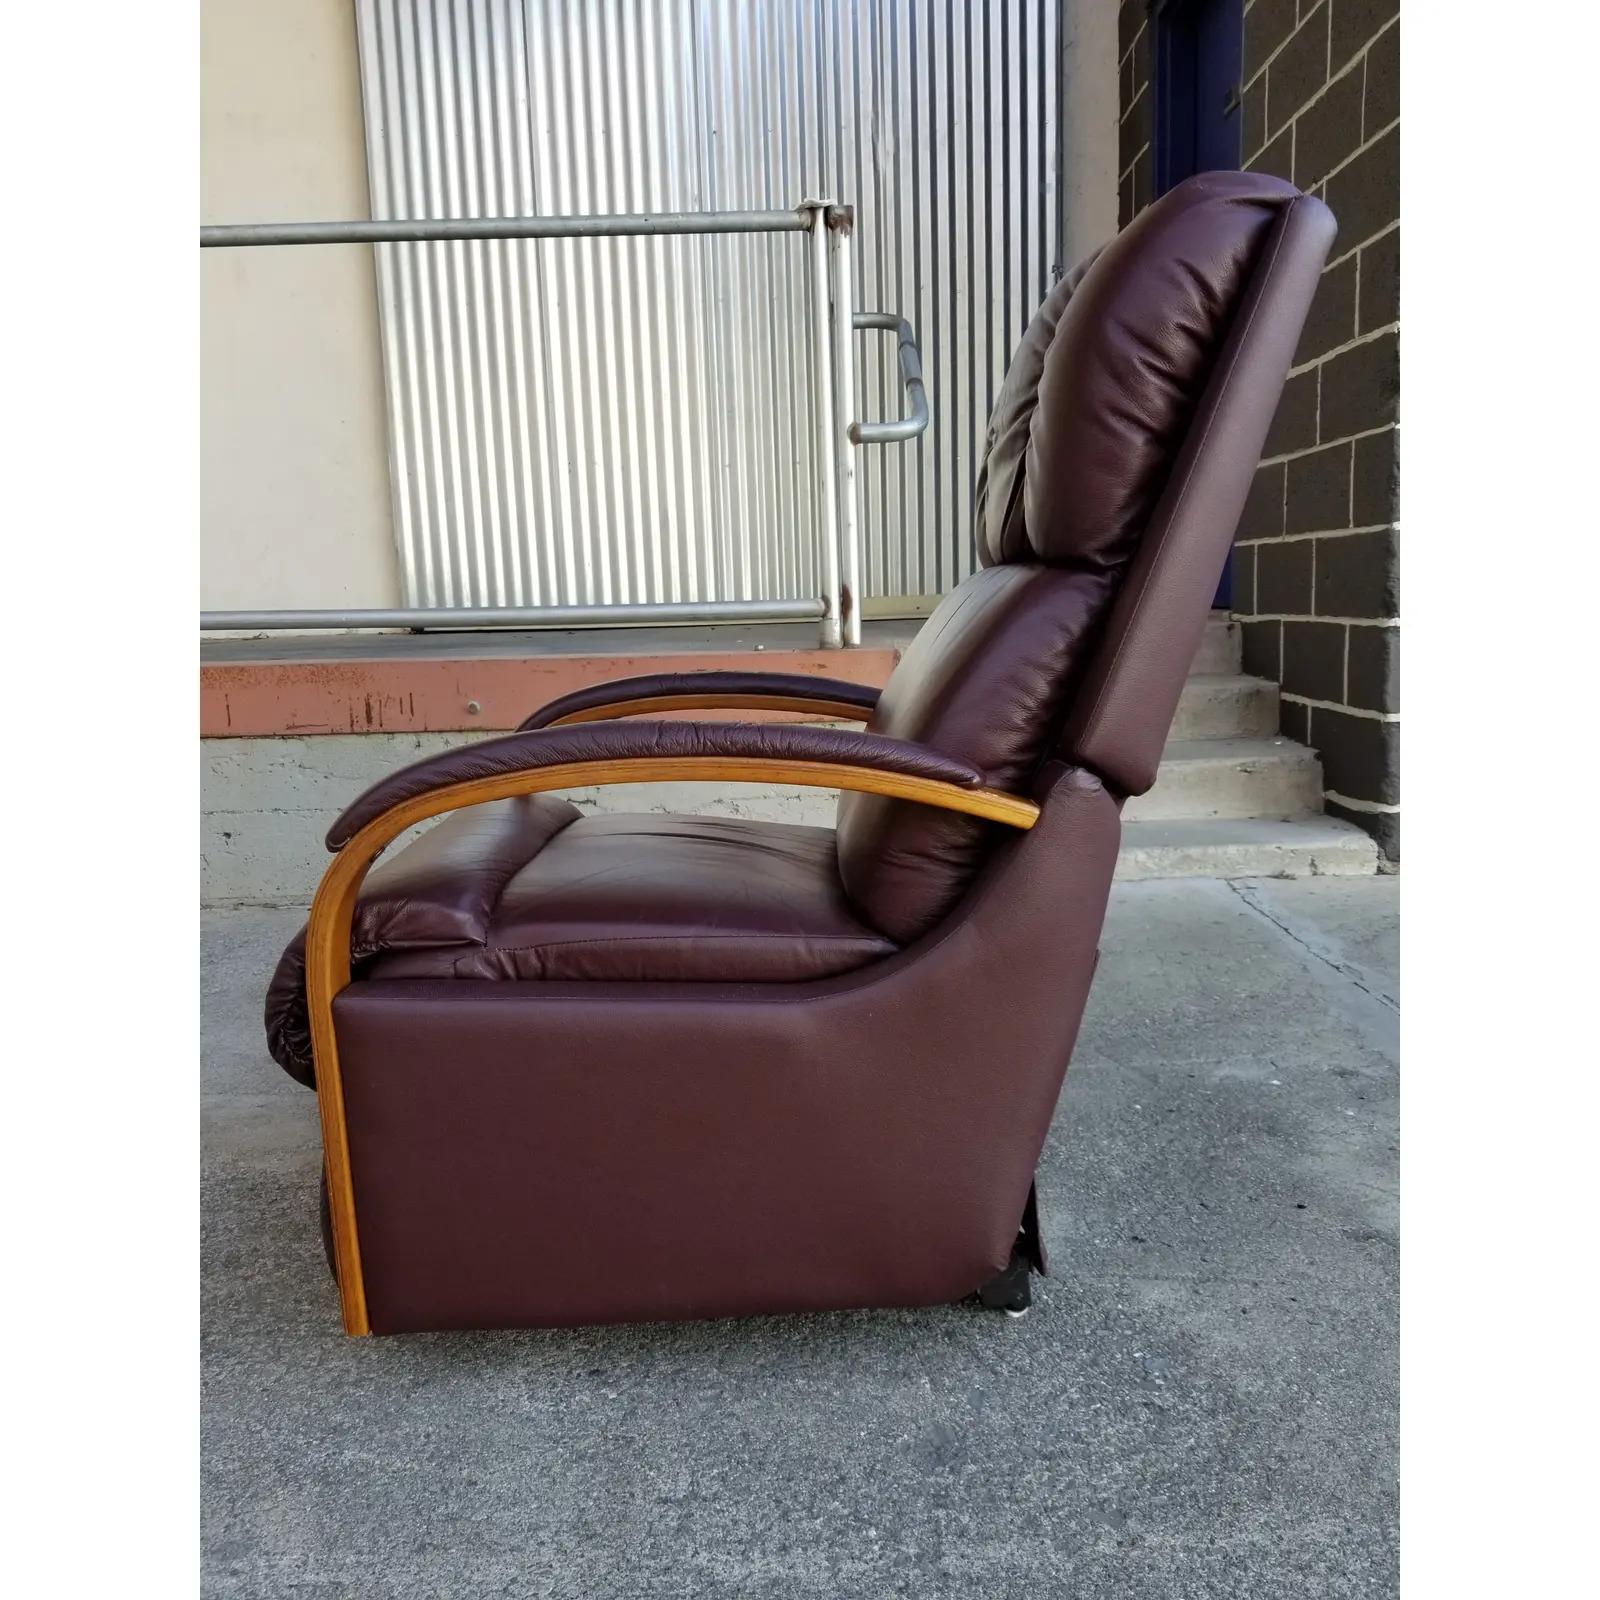 A leather reclining lounge chair by LA-Z-BOY. Amazing original condition with very minor wear, a few scuffs at back side. Solid oak steamed bentwood arms. Steel frame construction. Super comfort.